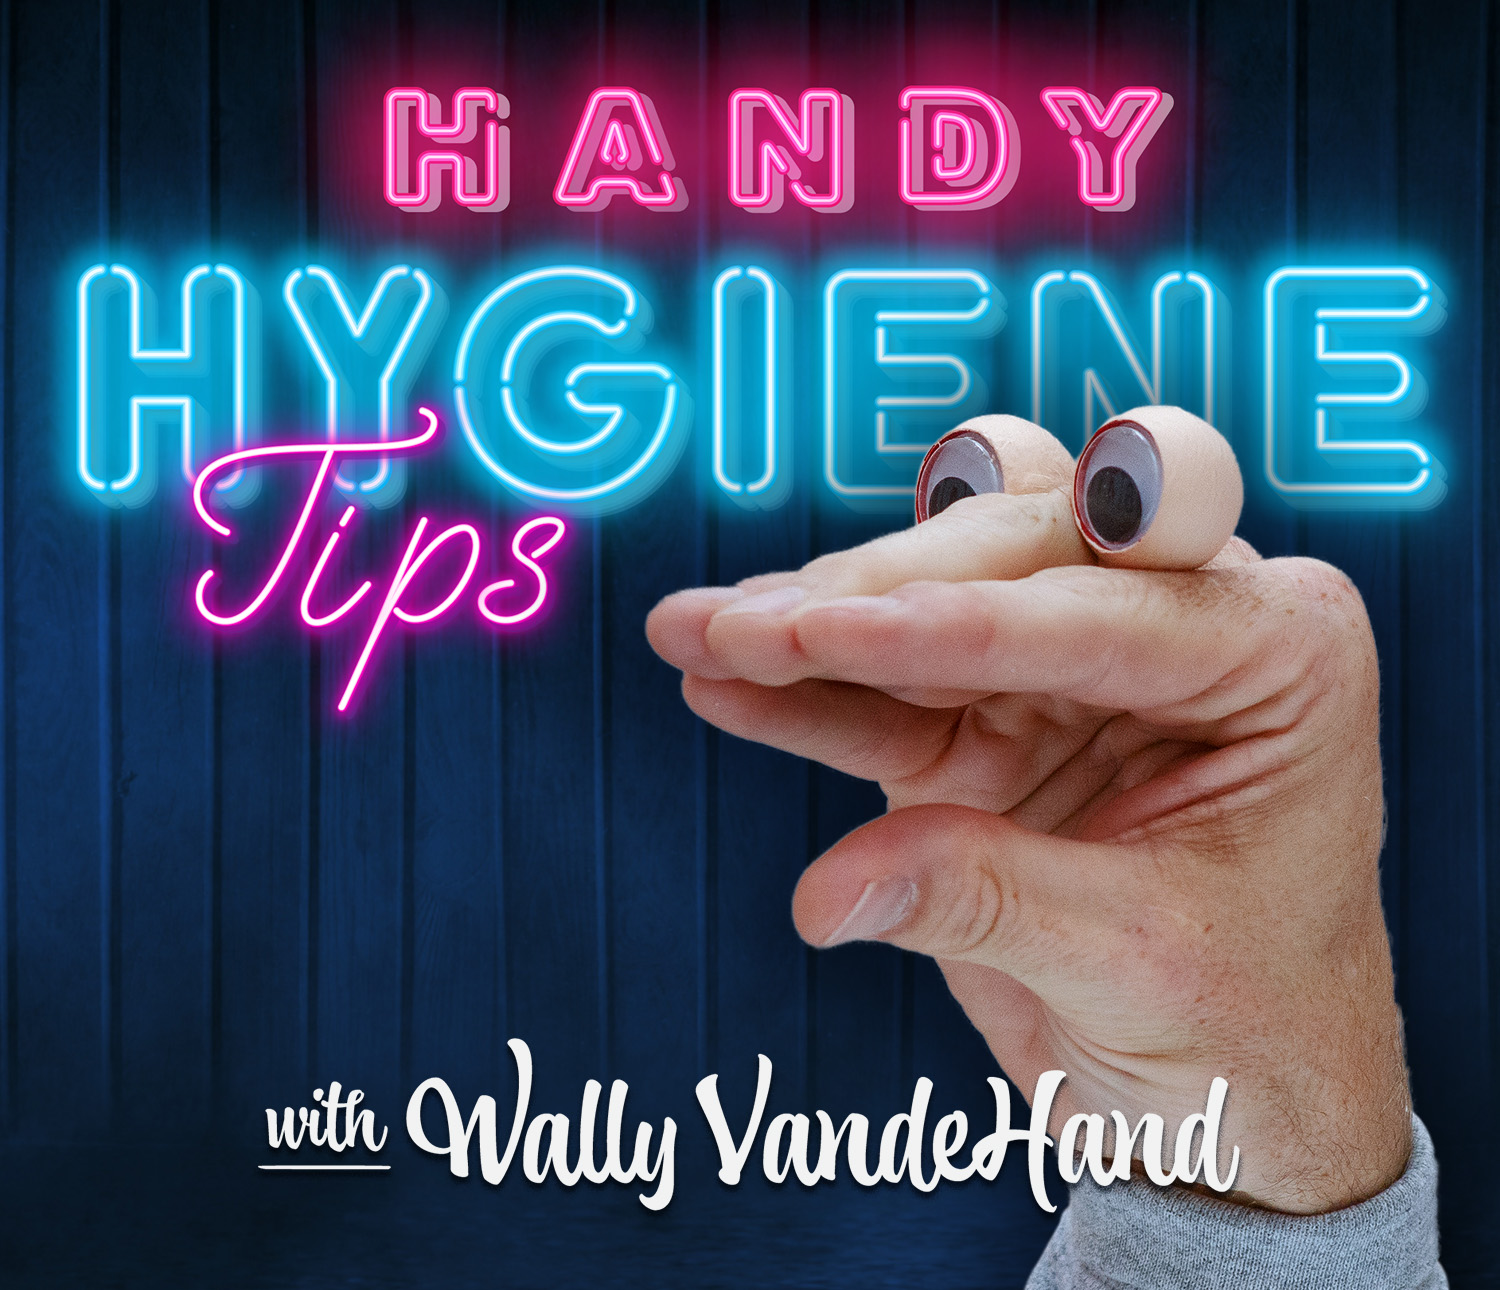 neon sign reading Handy Hygiene Tips with Wally VandeHand, who is a hand puppet and pictured next to the sign